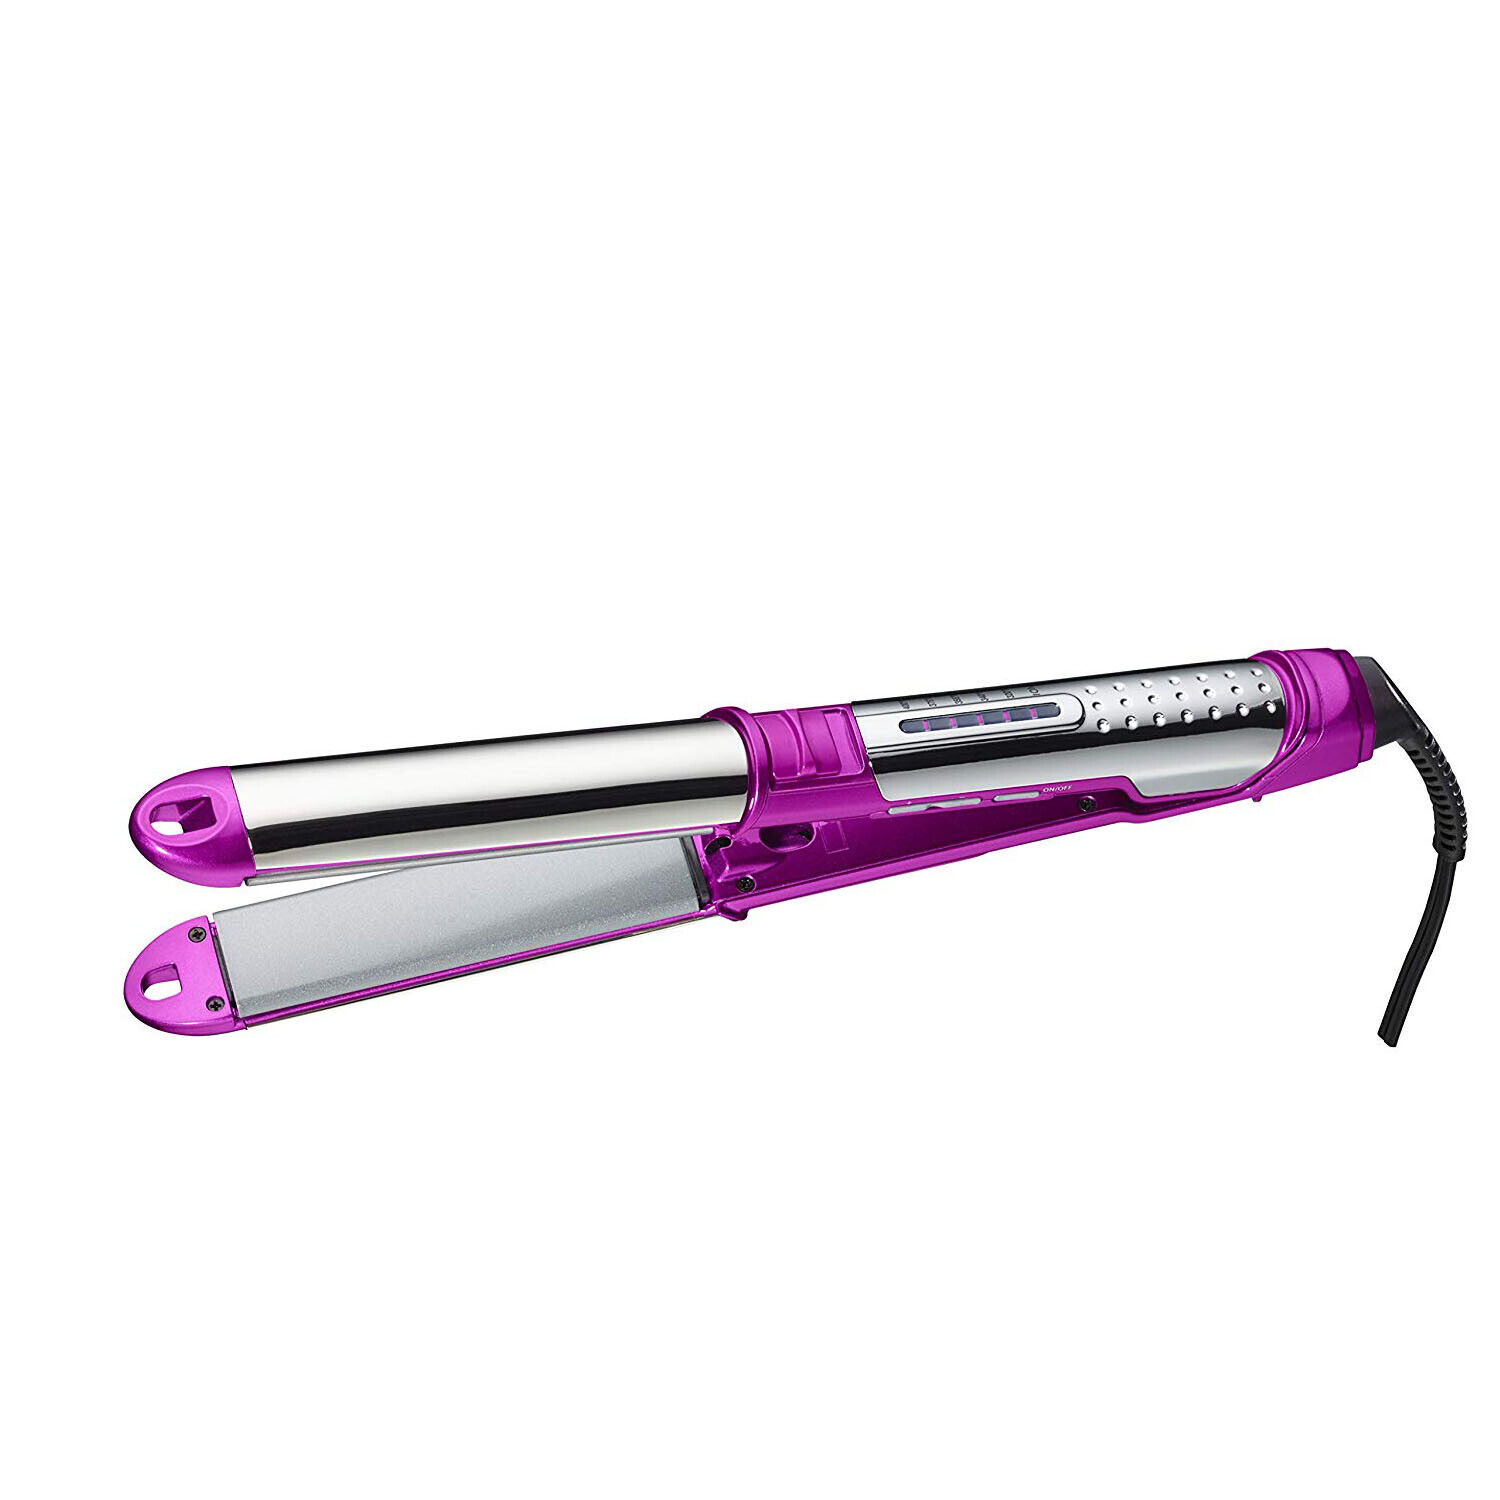 INFINITIPRO BY CONAIR 2-in-1 Stainless Styler ~ Curl/Wave or Straighten,  1-inch, 74108345851 | eBay